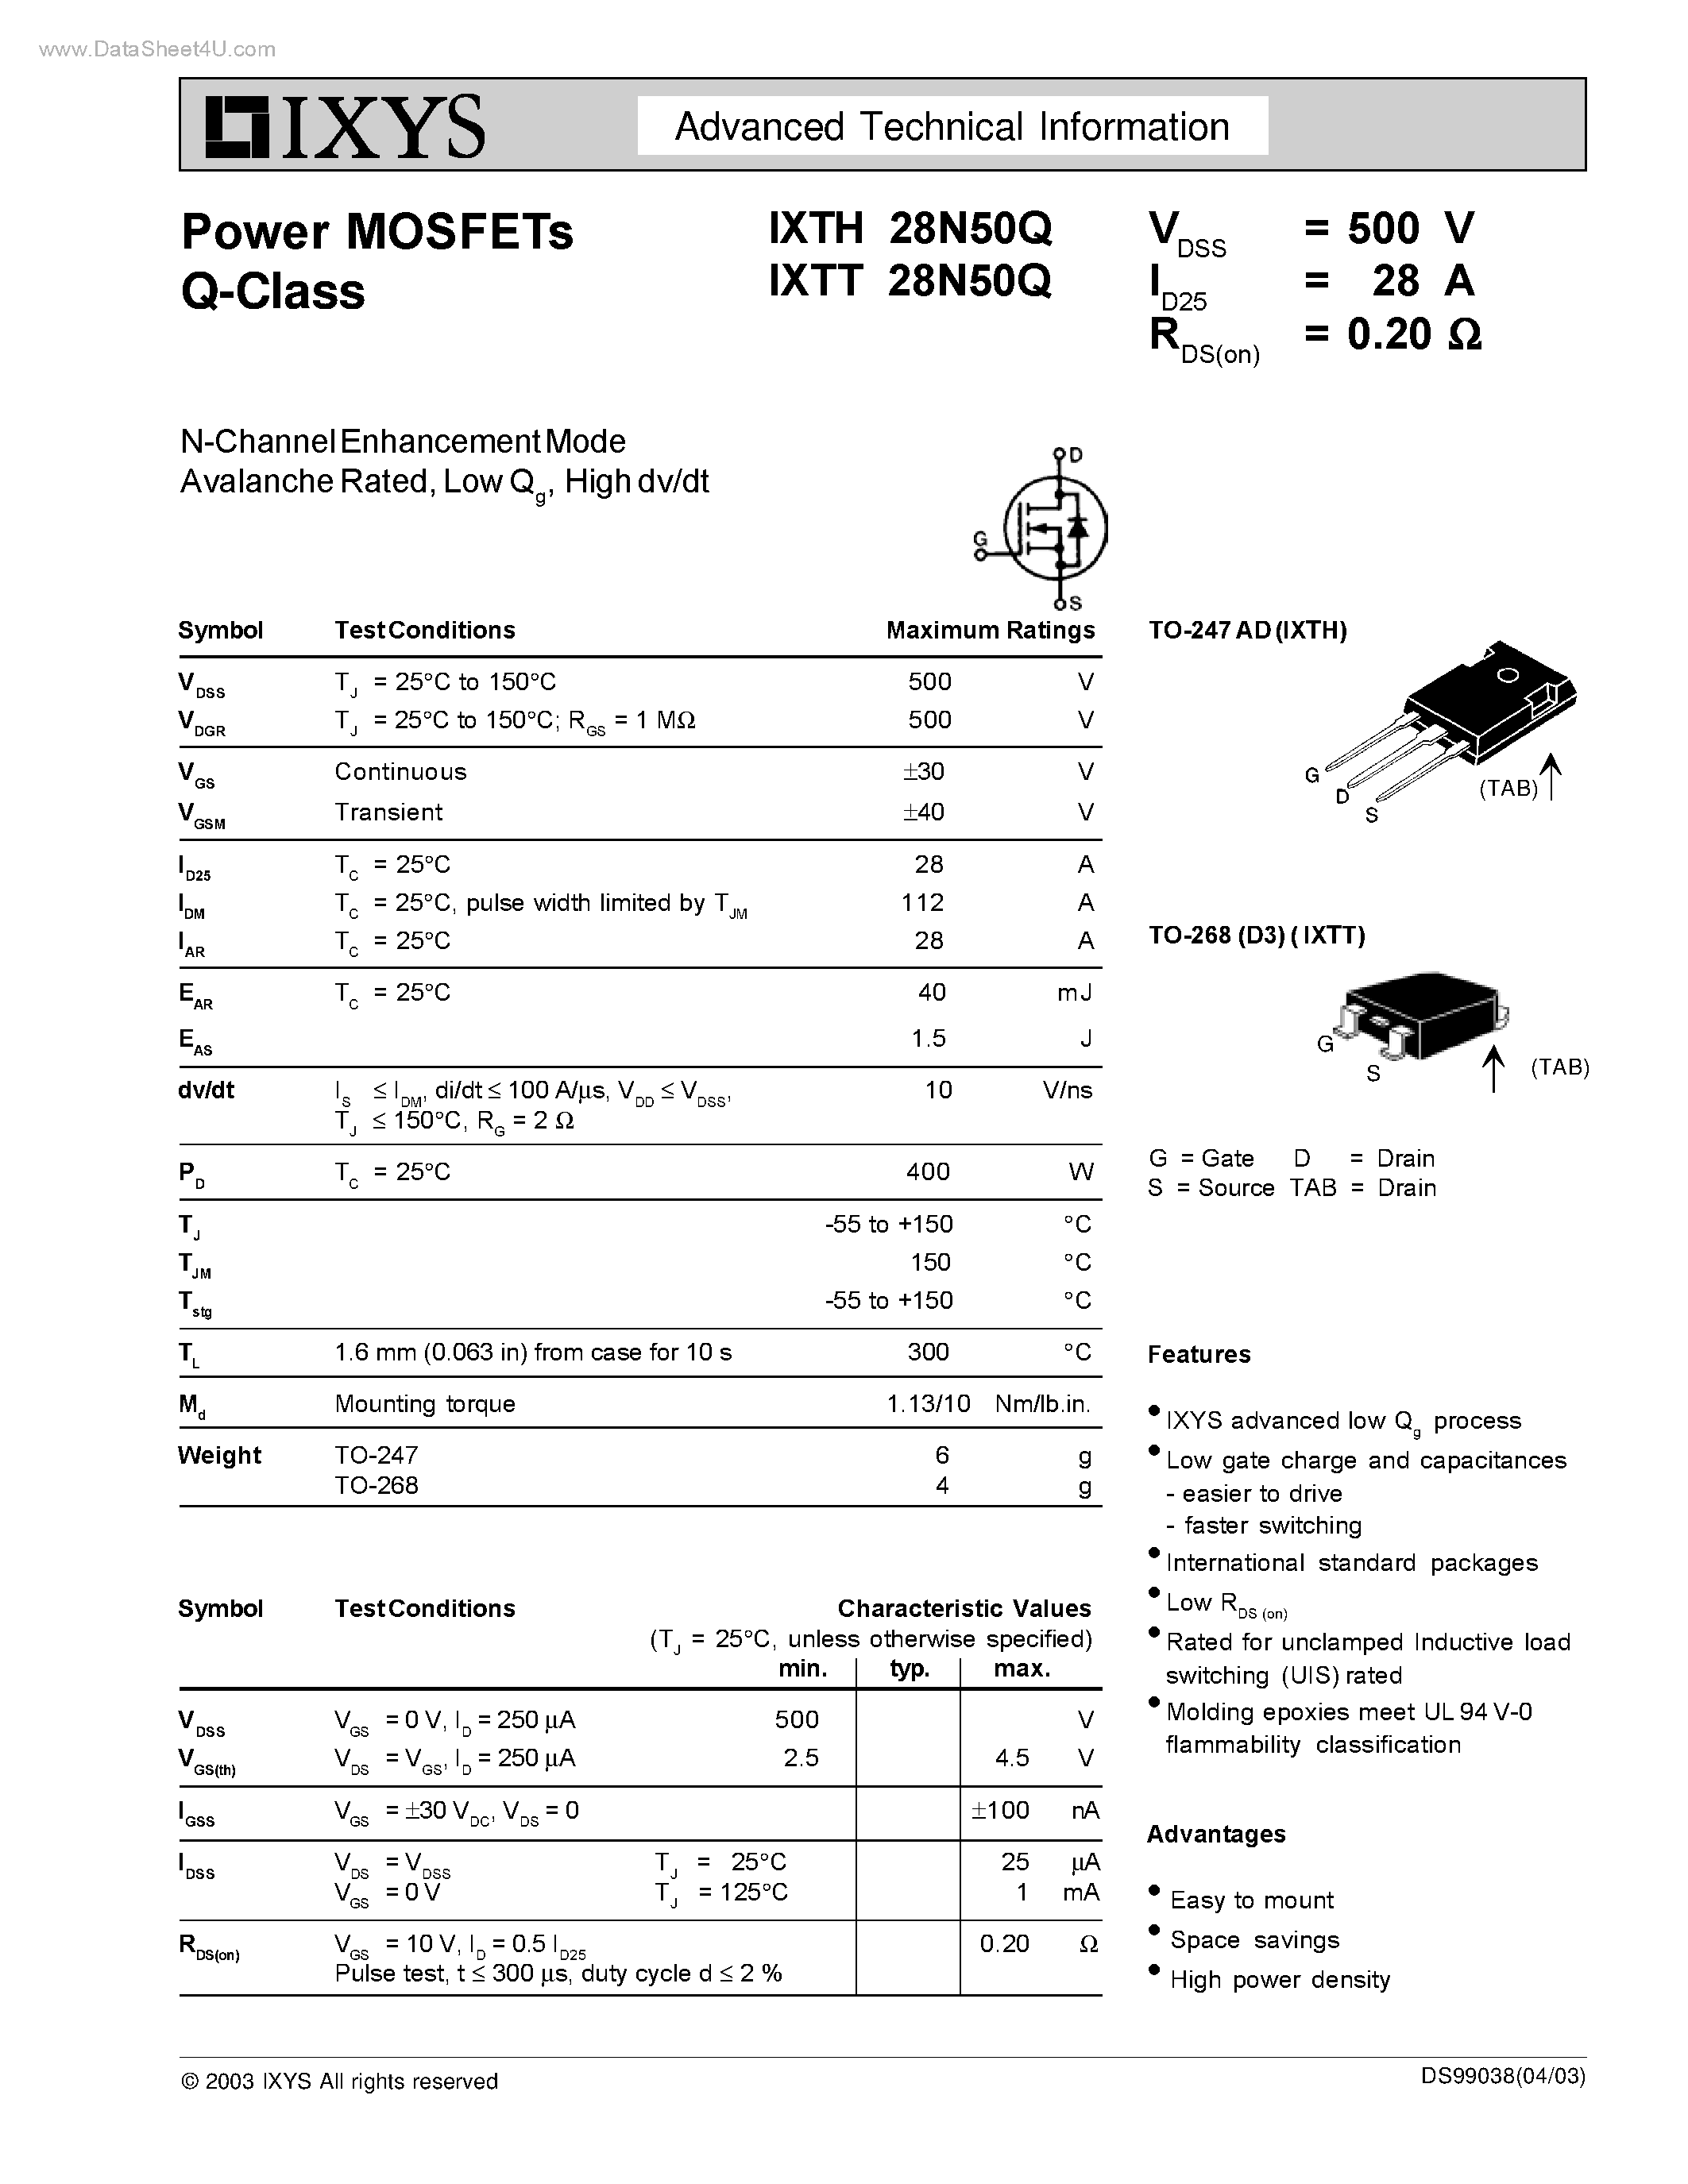 Datasheet IXTH28N50Q - Power MOSFETs Q-Class page 1